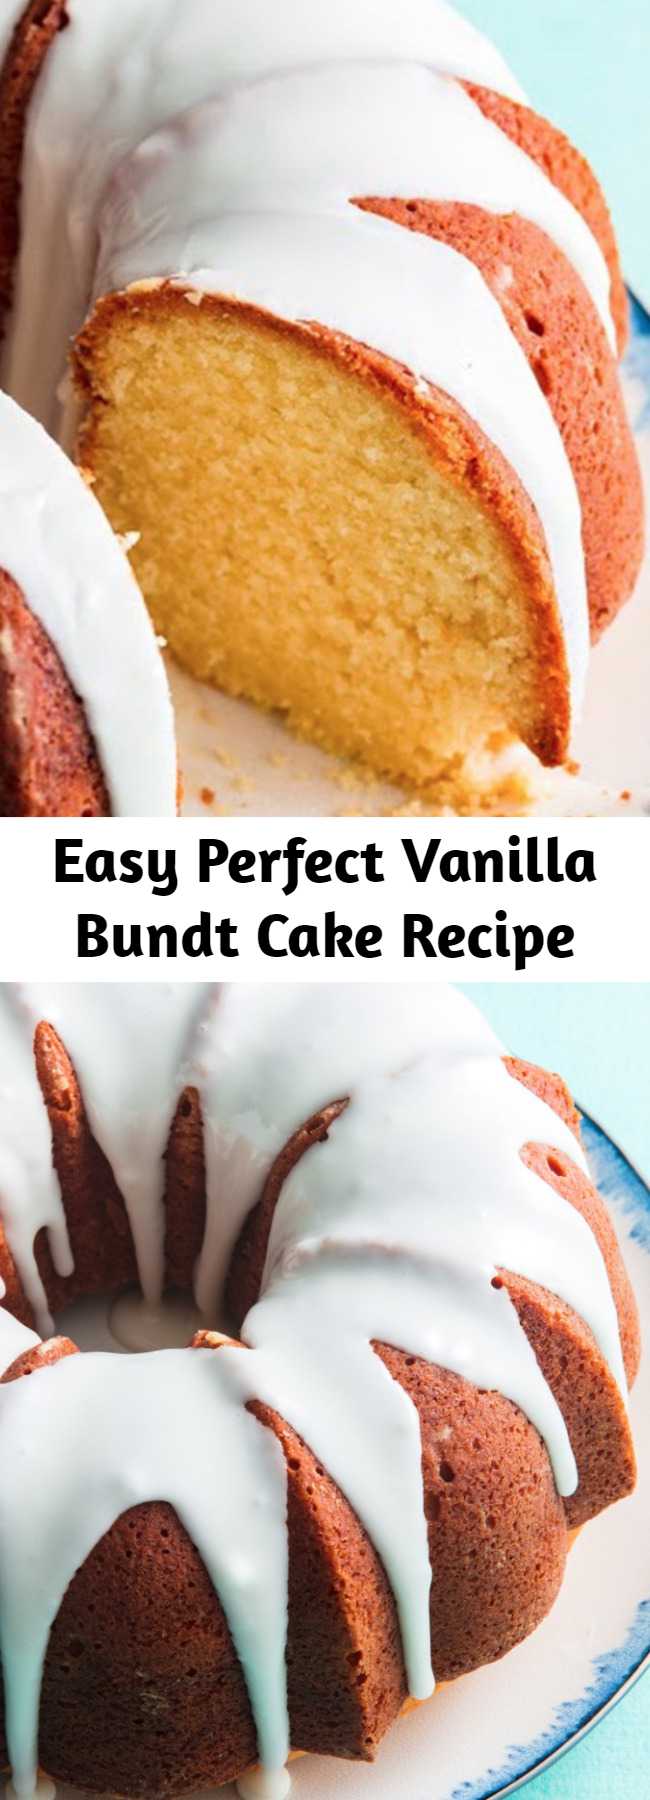 Easy Perfect Vanilla Bundt Cake Recipe - We tested this cake over and over again until it was absolutely perfect. Even the most amateur baker can nail it at home.